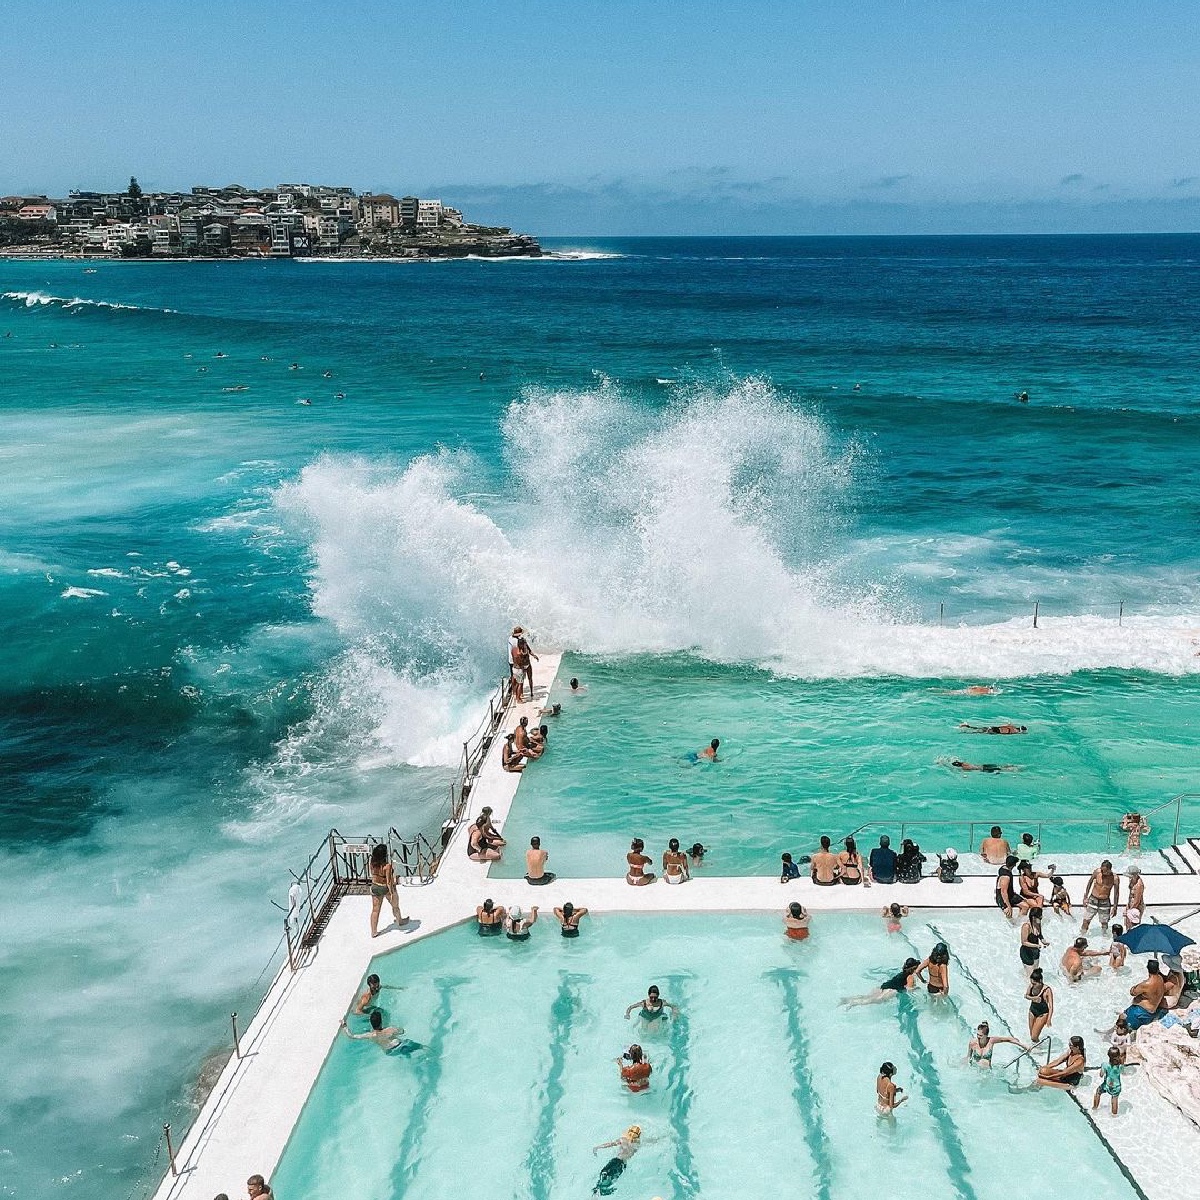 Mentally, here - care to join us? 🏊‍♀️

Perched on the rocks of @sydney_sider's iconic #BondiBeach, it's easy to see why Bondi Icebergs is one of the most photographed #oceanpools in the world. 

(📸: IG/dimimathiou)

#seeaustralia #comeandsaygday